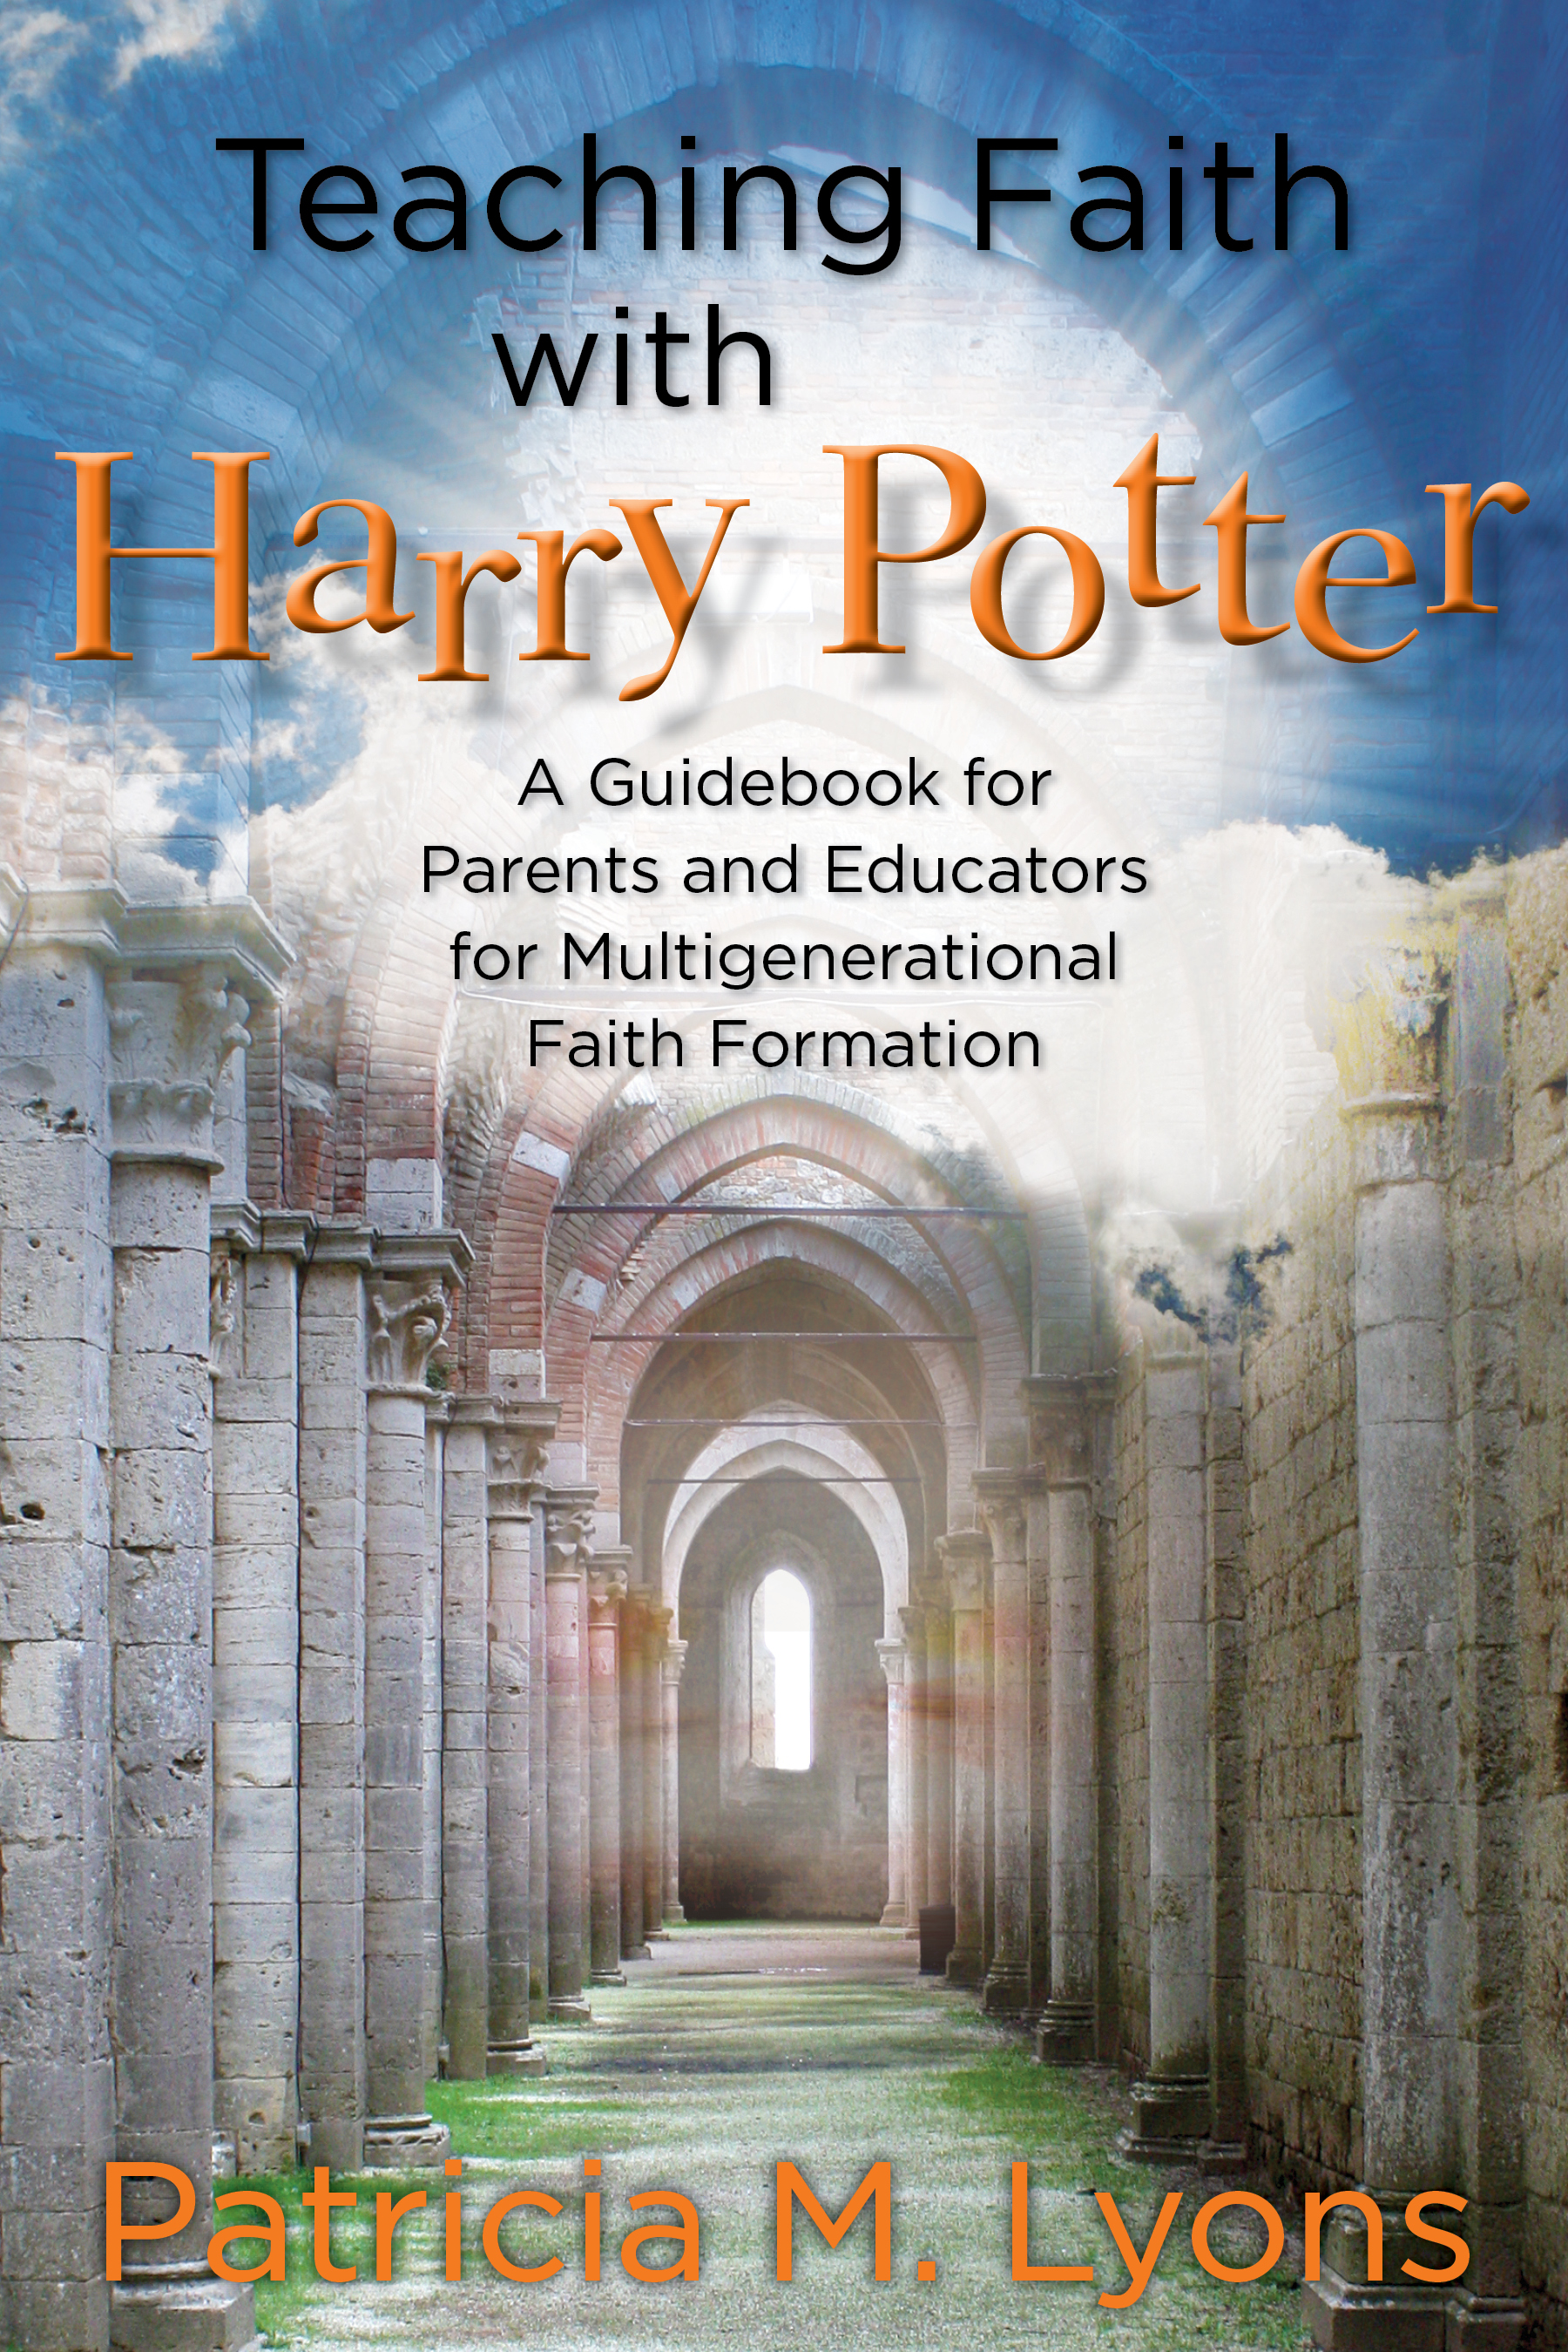 christian book review harry potter